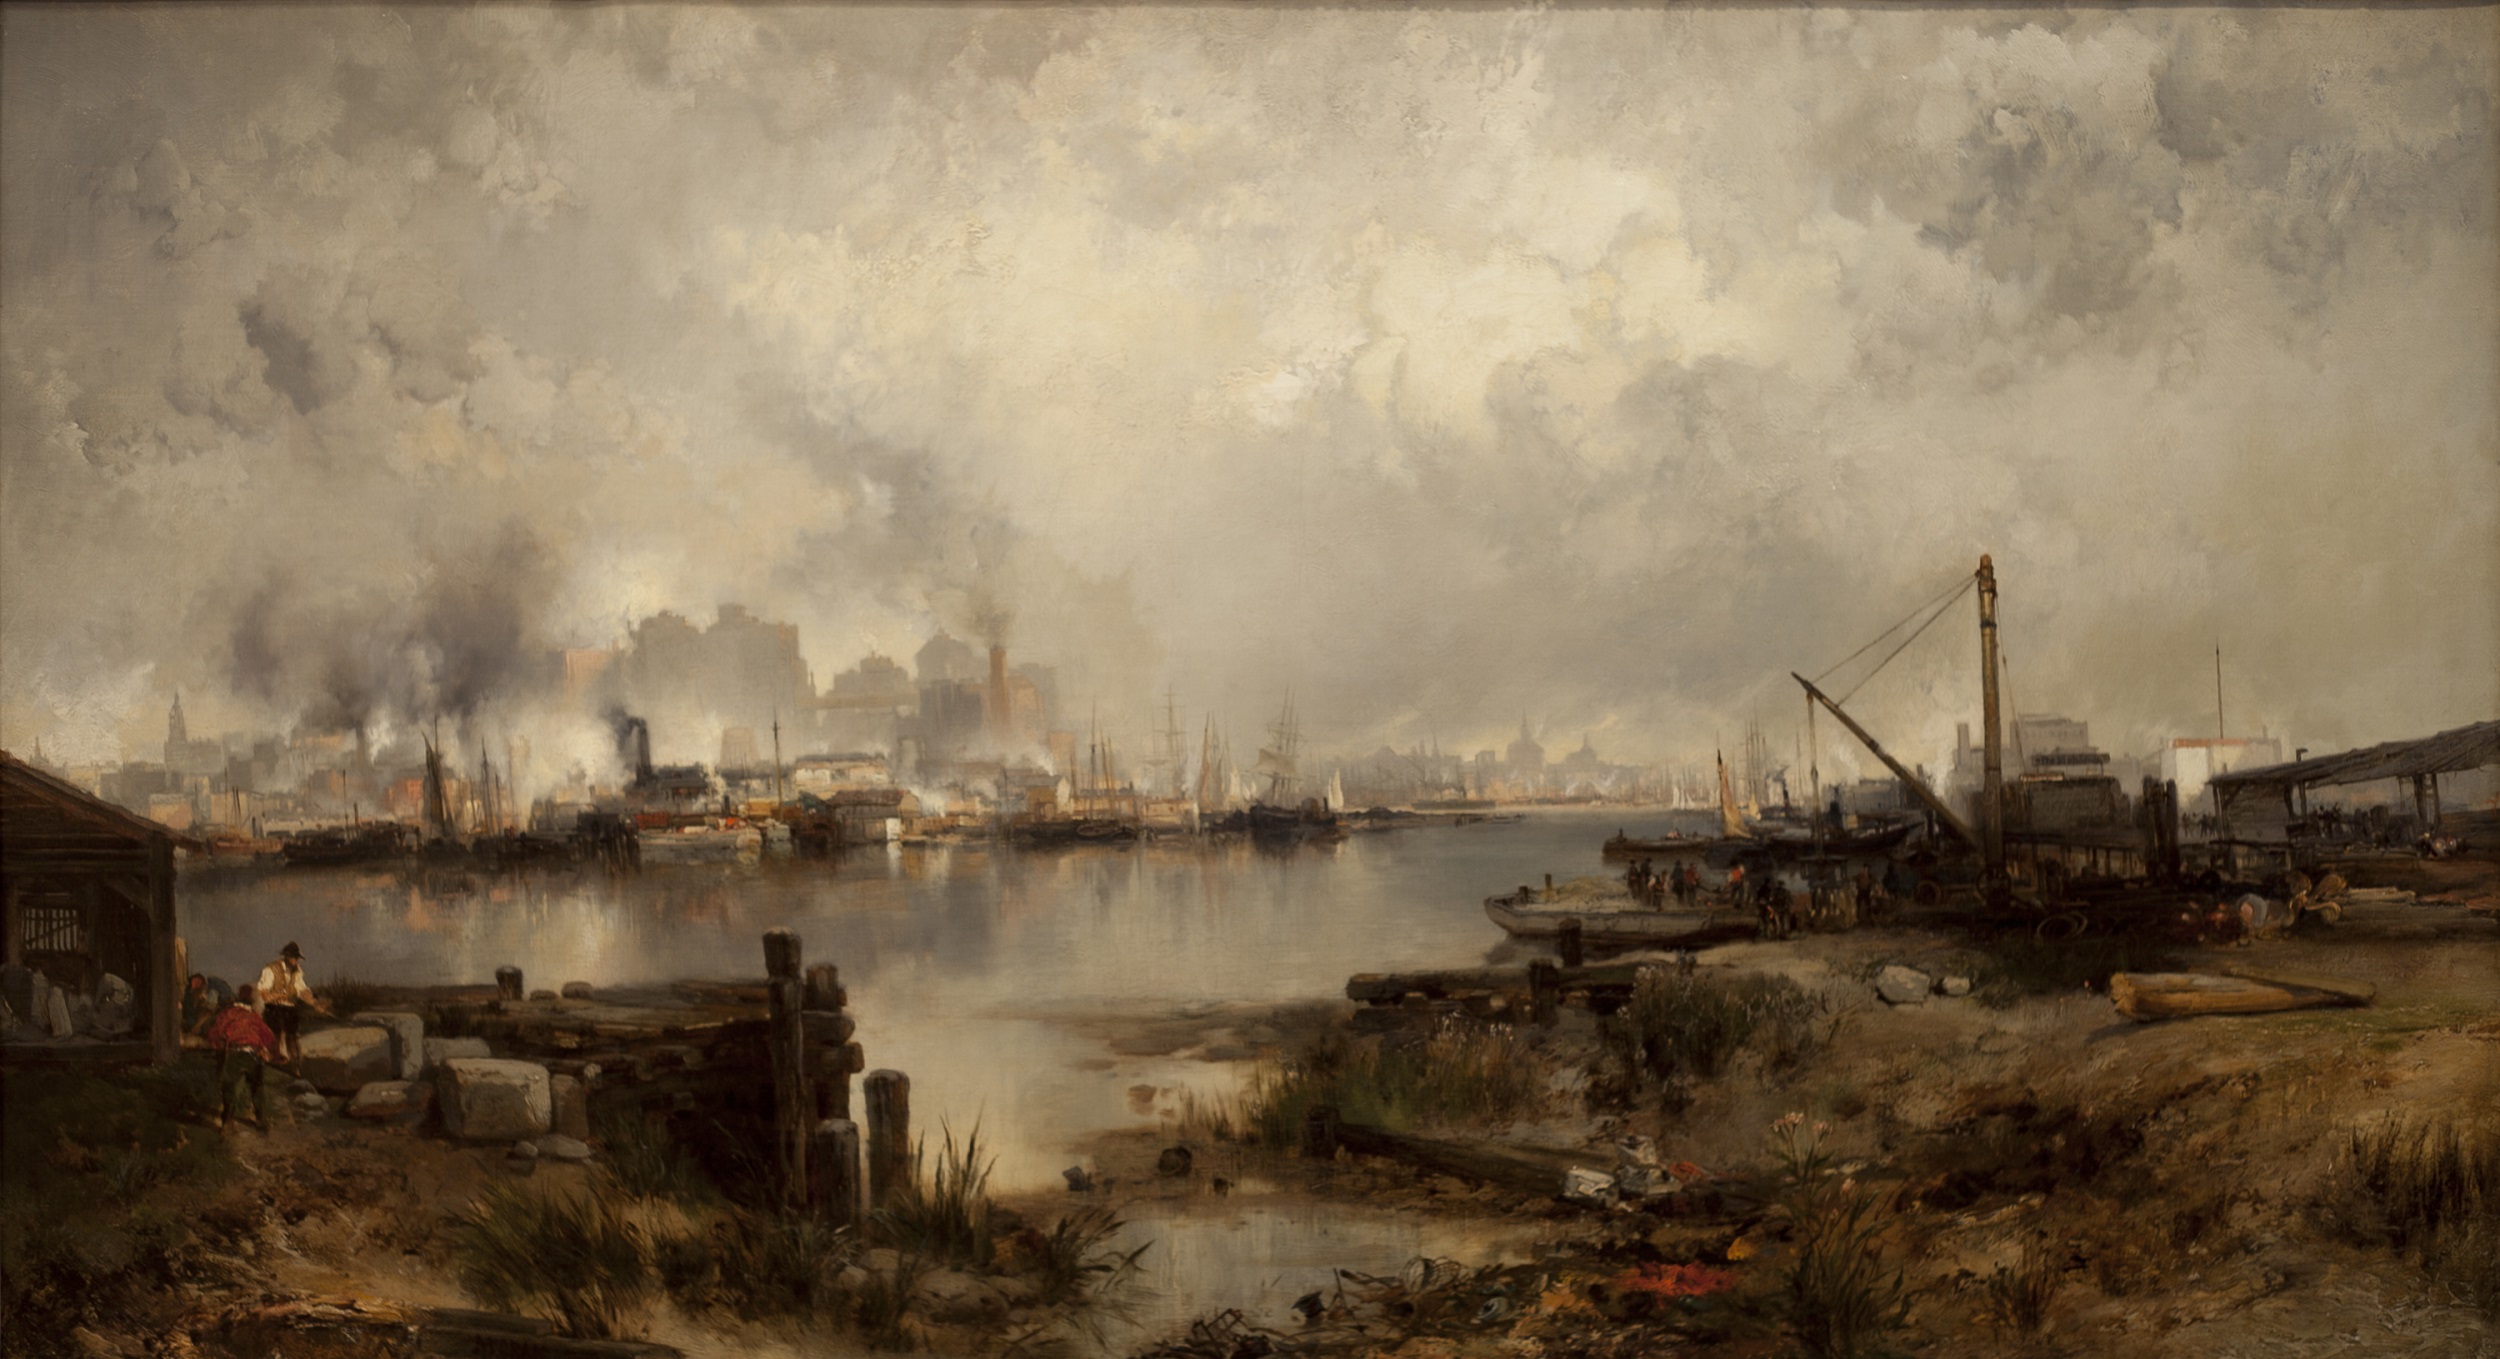 Oil painting of an industrial city seen from across a harbor. Puffs of smoke from the chimneys merge into gray clouds above. 